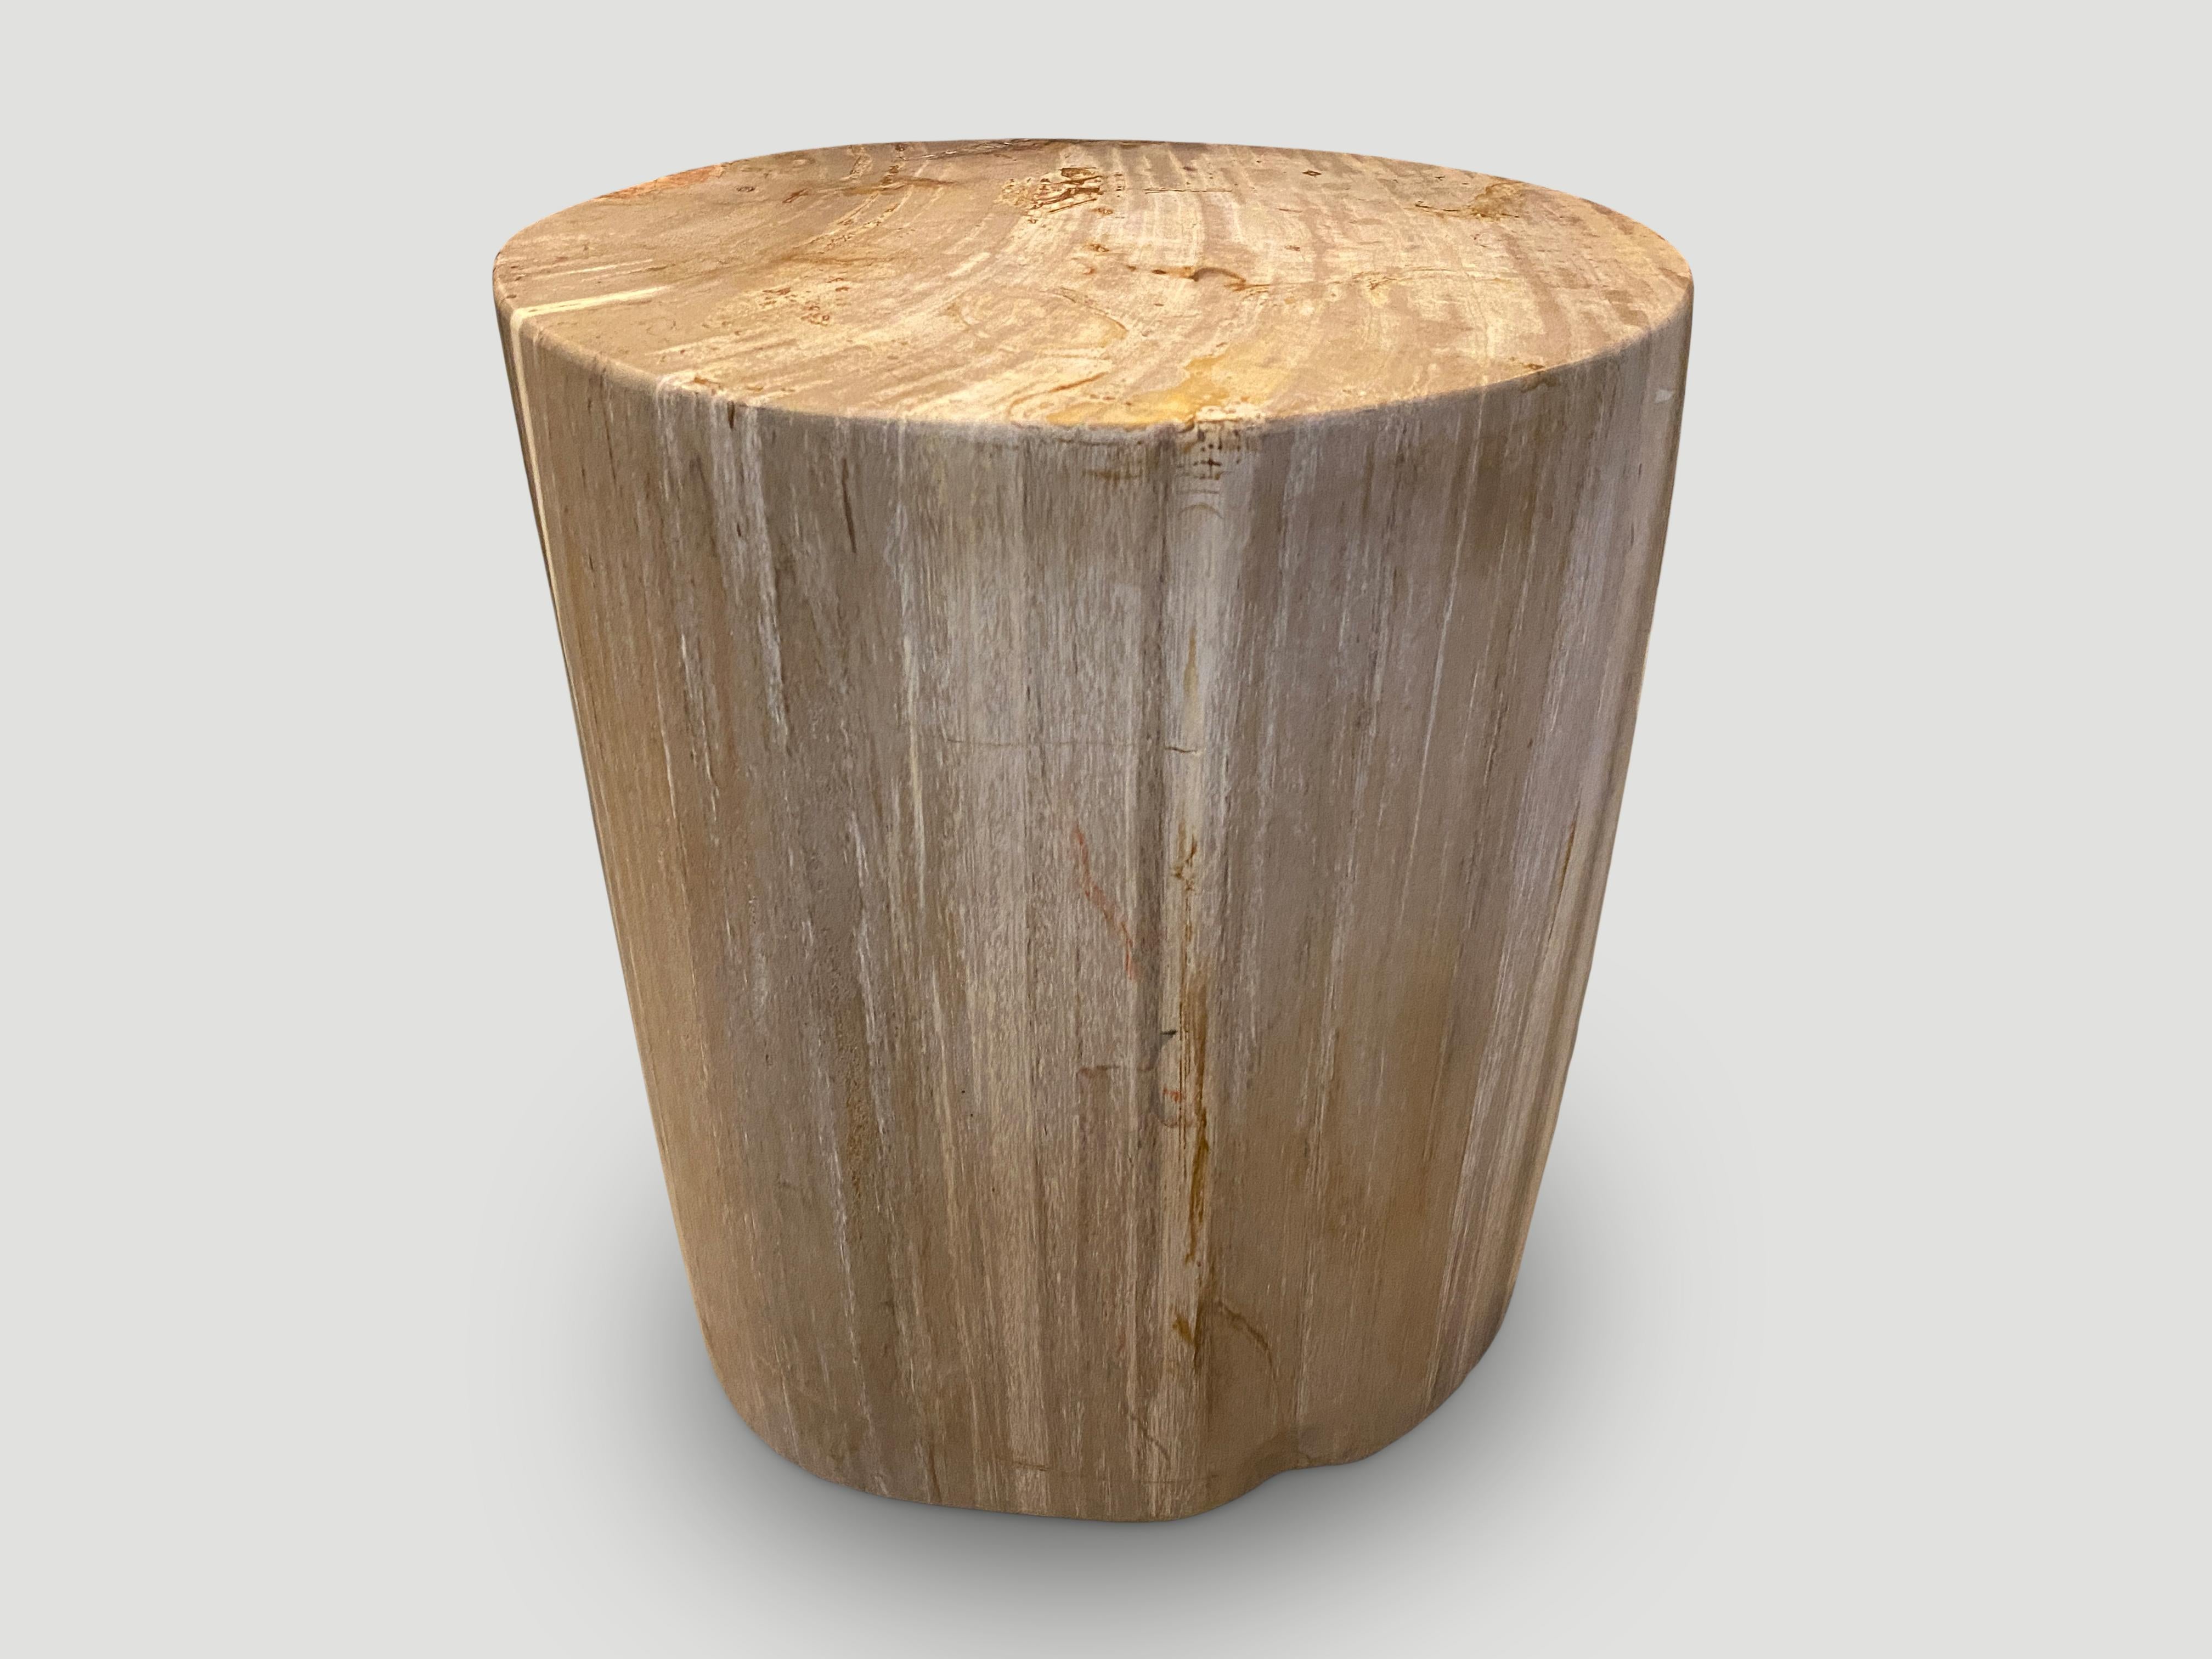 Beautiful neutral tones and markings on this high quality petrified wood side table. It’s fascinating how Mother Nature produces these exquisite 40 million year old petrified teak logs with such contrasting colors and natural patterns throughout.